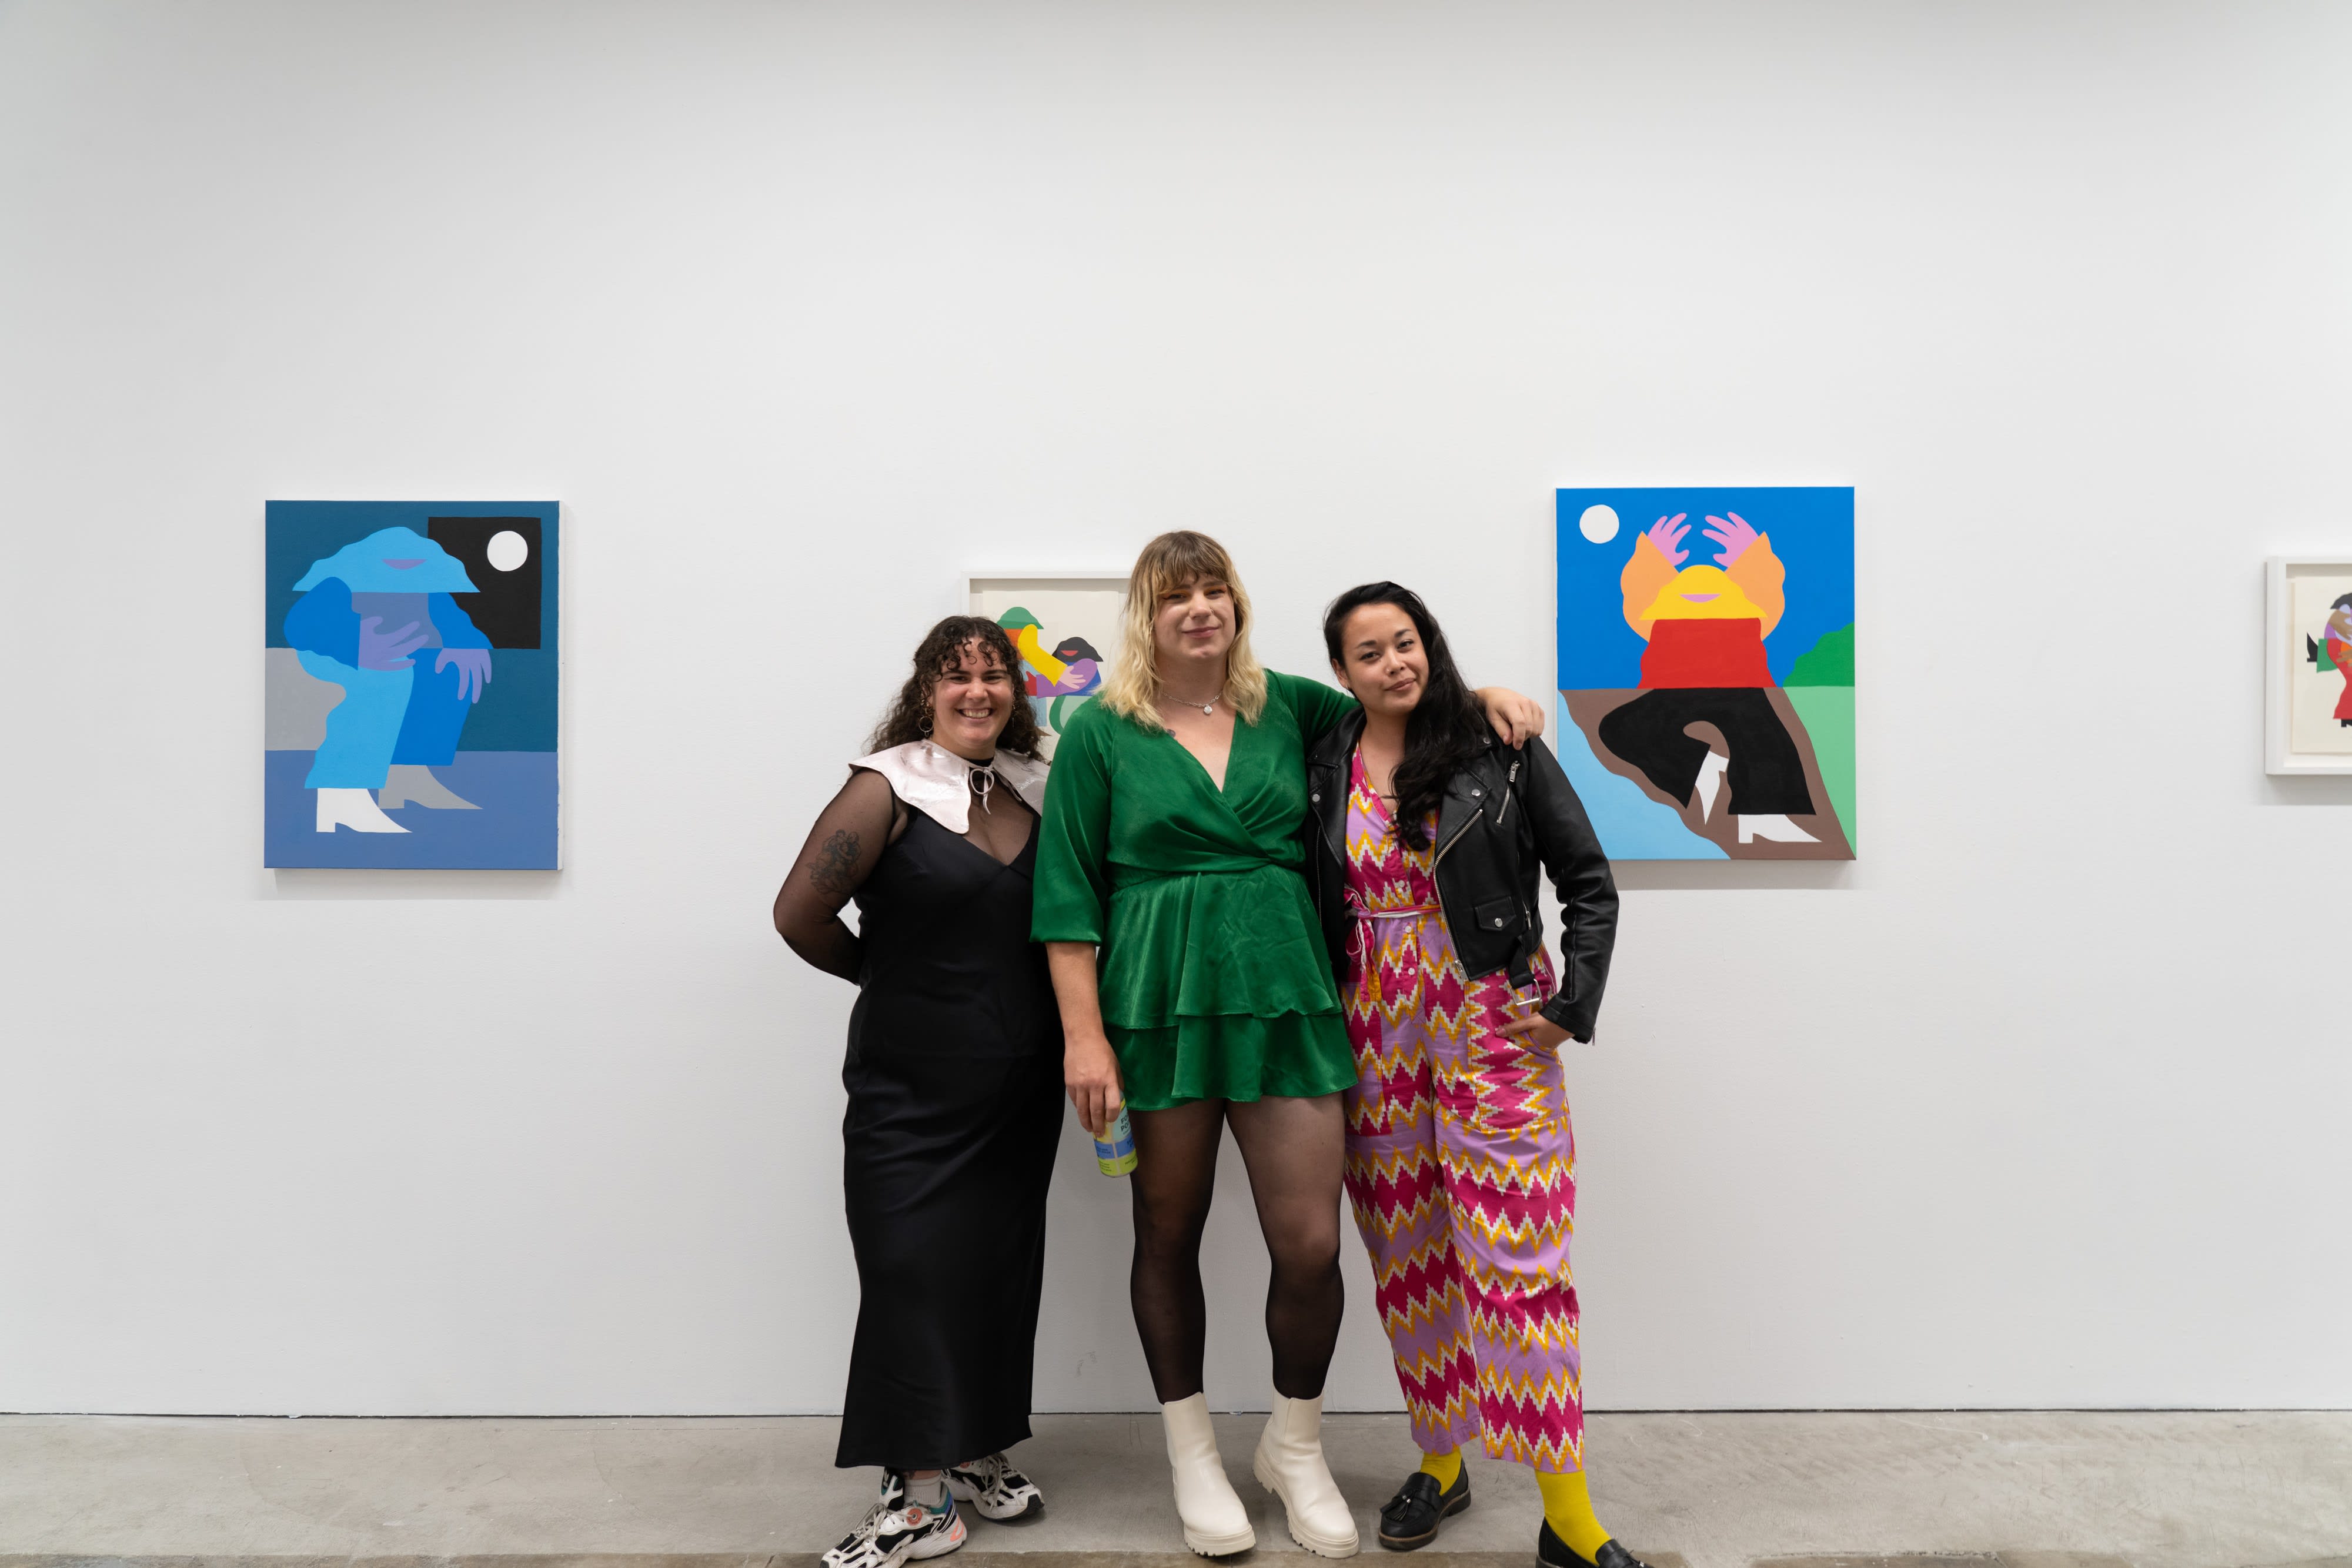 Communications Associate Katherine Hamilton, artist Marbie, and LA Director Dasha Matsuura pose together in front of Marbie's work. 